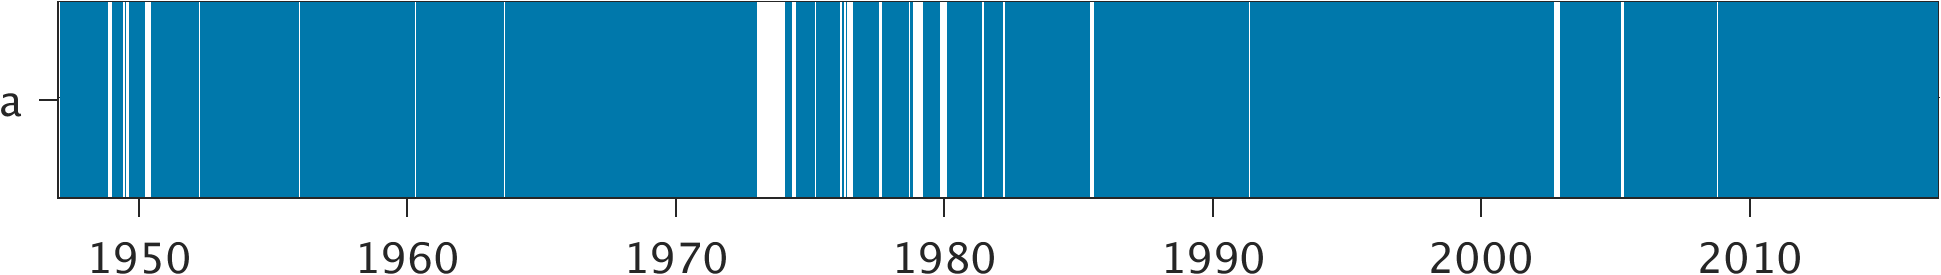 Plot of data availability of time series